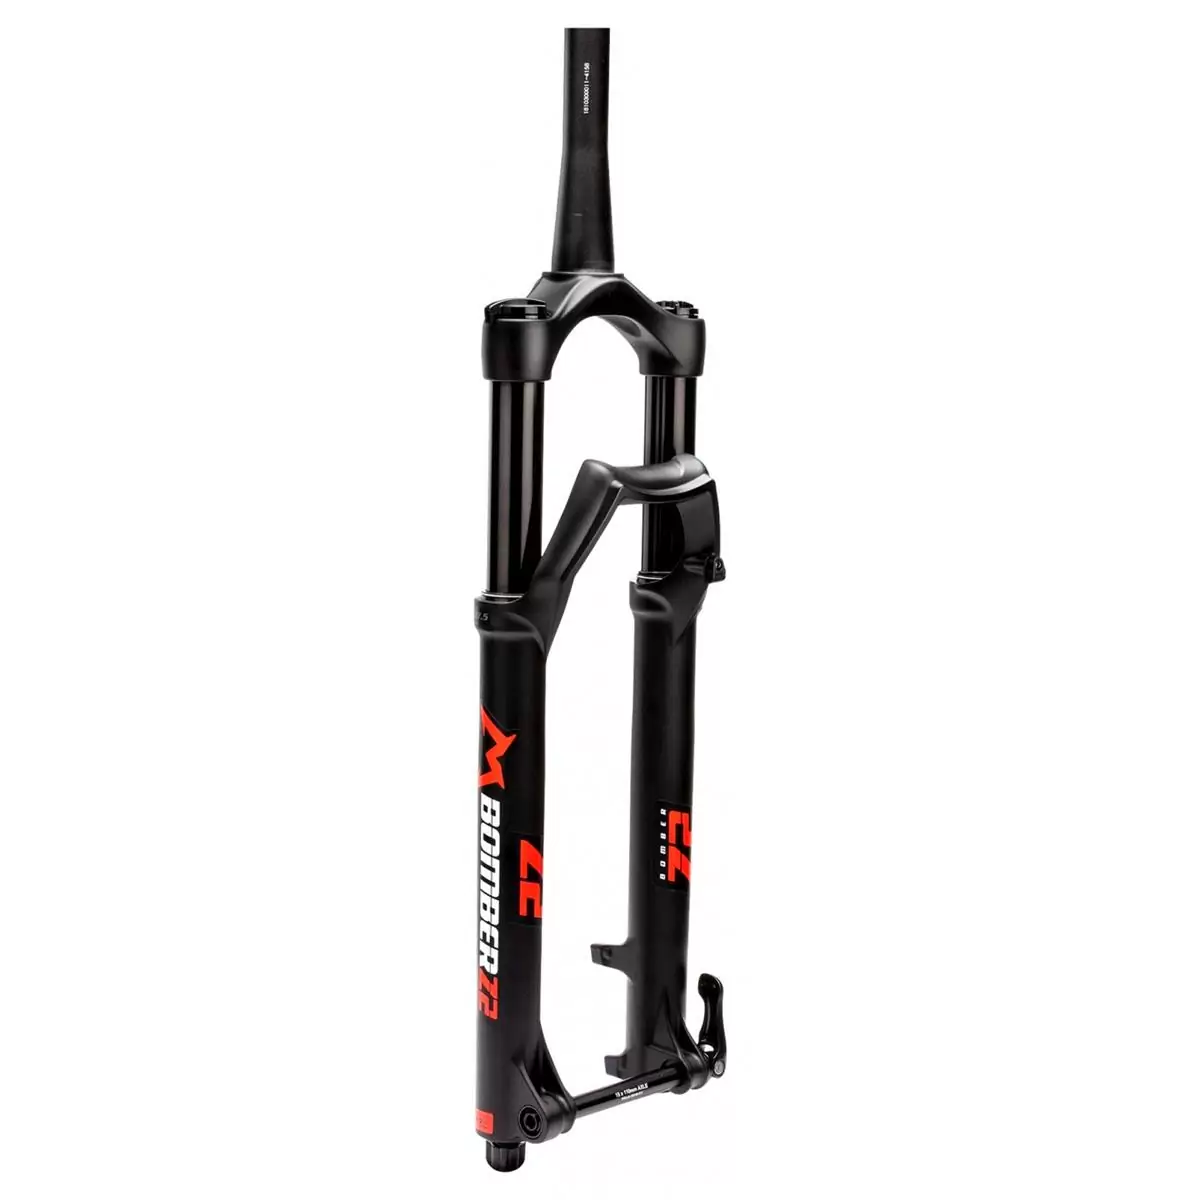 Forcella Bomber Z2 Air 27.5'' 140mm 15x110 boost Rail Sweep-Adj offset 44mm nero - image